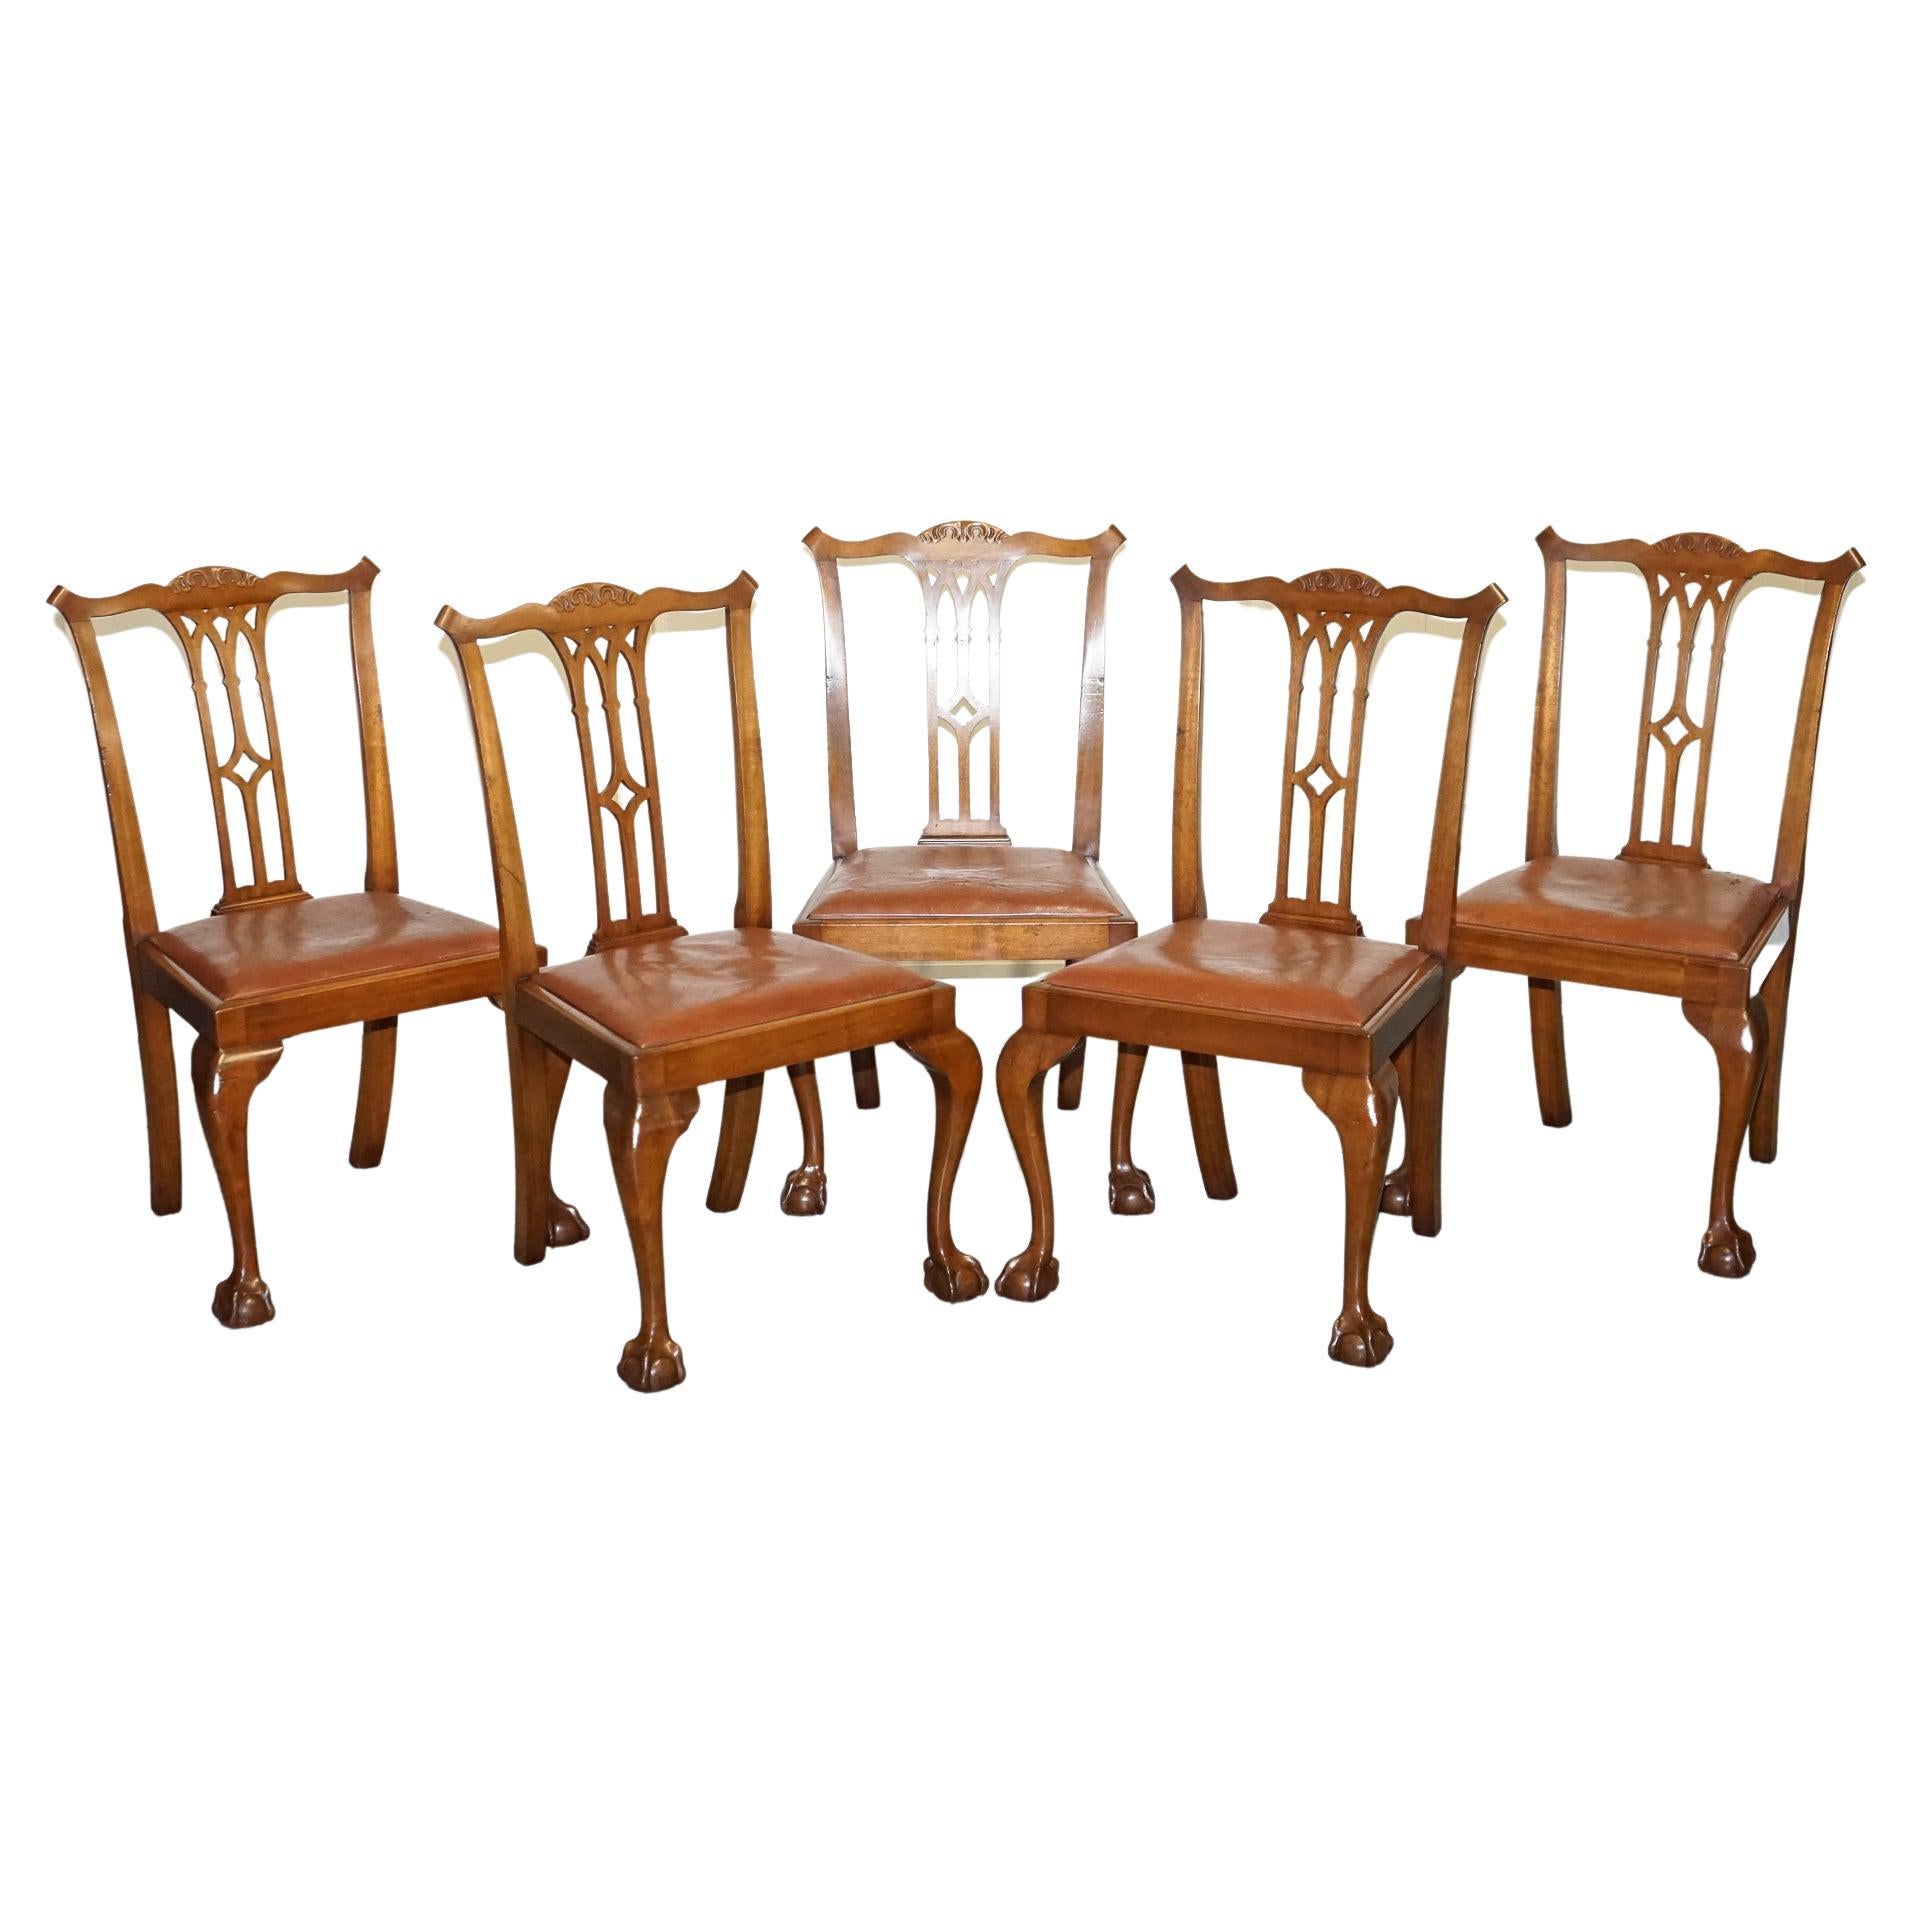 CHIPPENDALE STYLE 5 DINING CHAIRS WiTH LEATHER SEATS PERFECT FOR ROUND TABLE For Sale